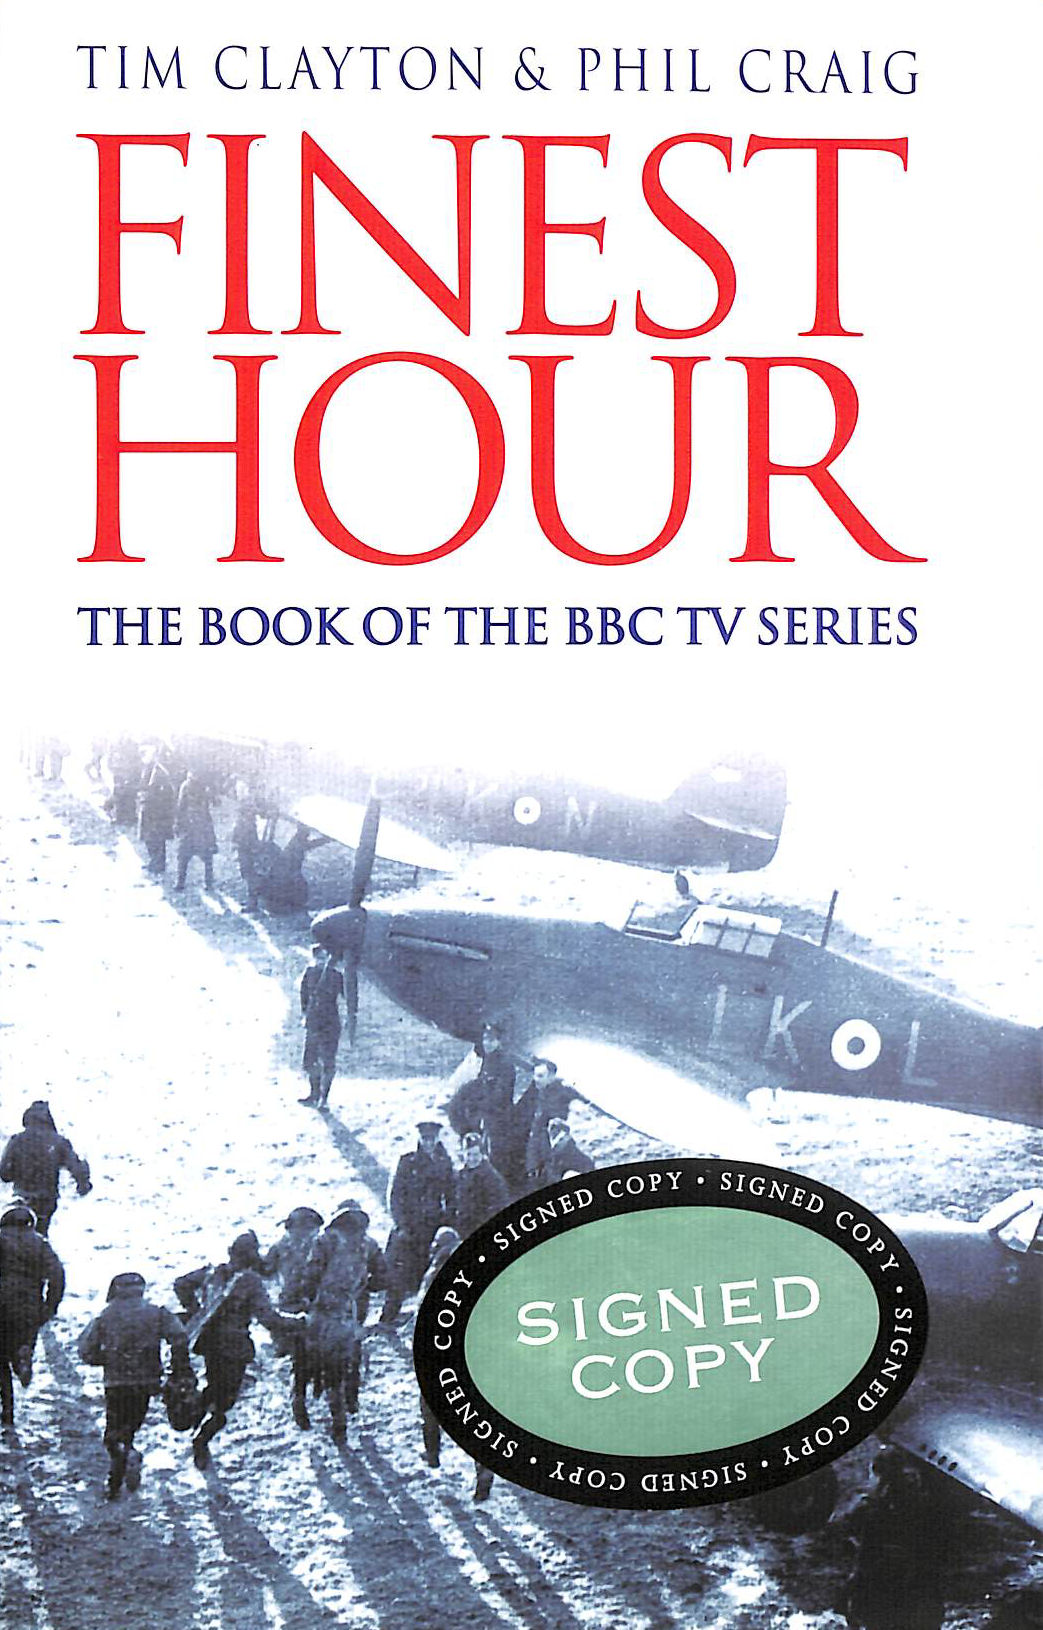 PHIL CRAIG; TIM CLAYTON - Finest Hour: The bestselling story of the Battle of Britain